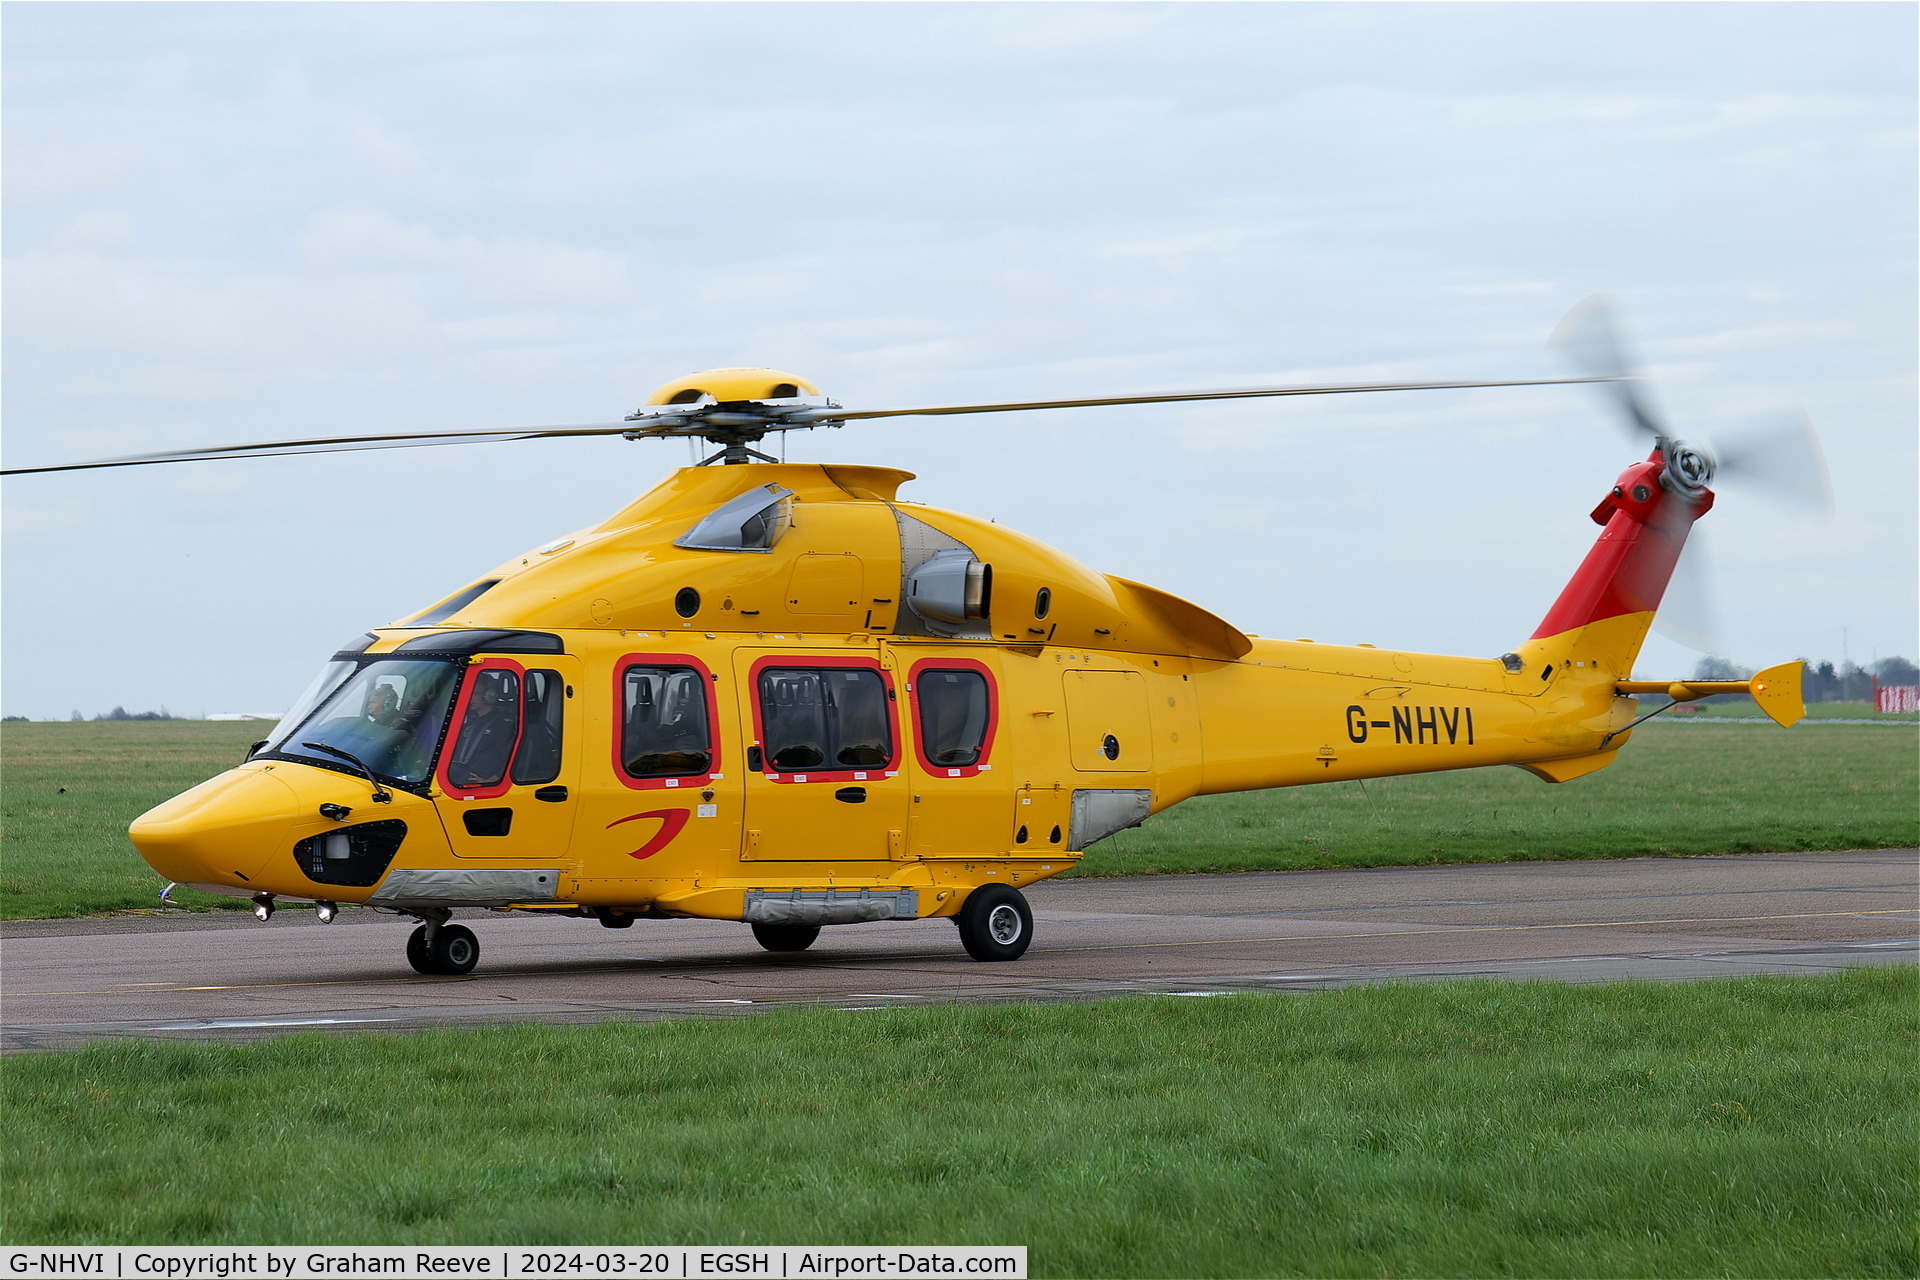 G-NHVI, 2015 Airbus Helicopters EC-175B C/N 5010, Just landed at Norwich.